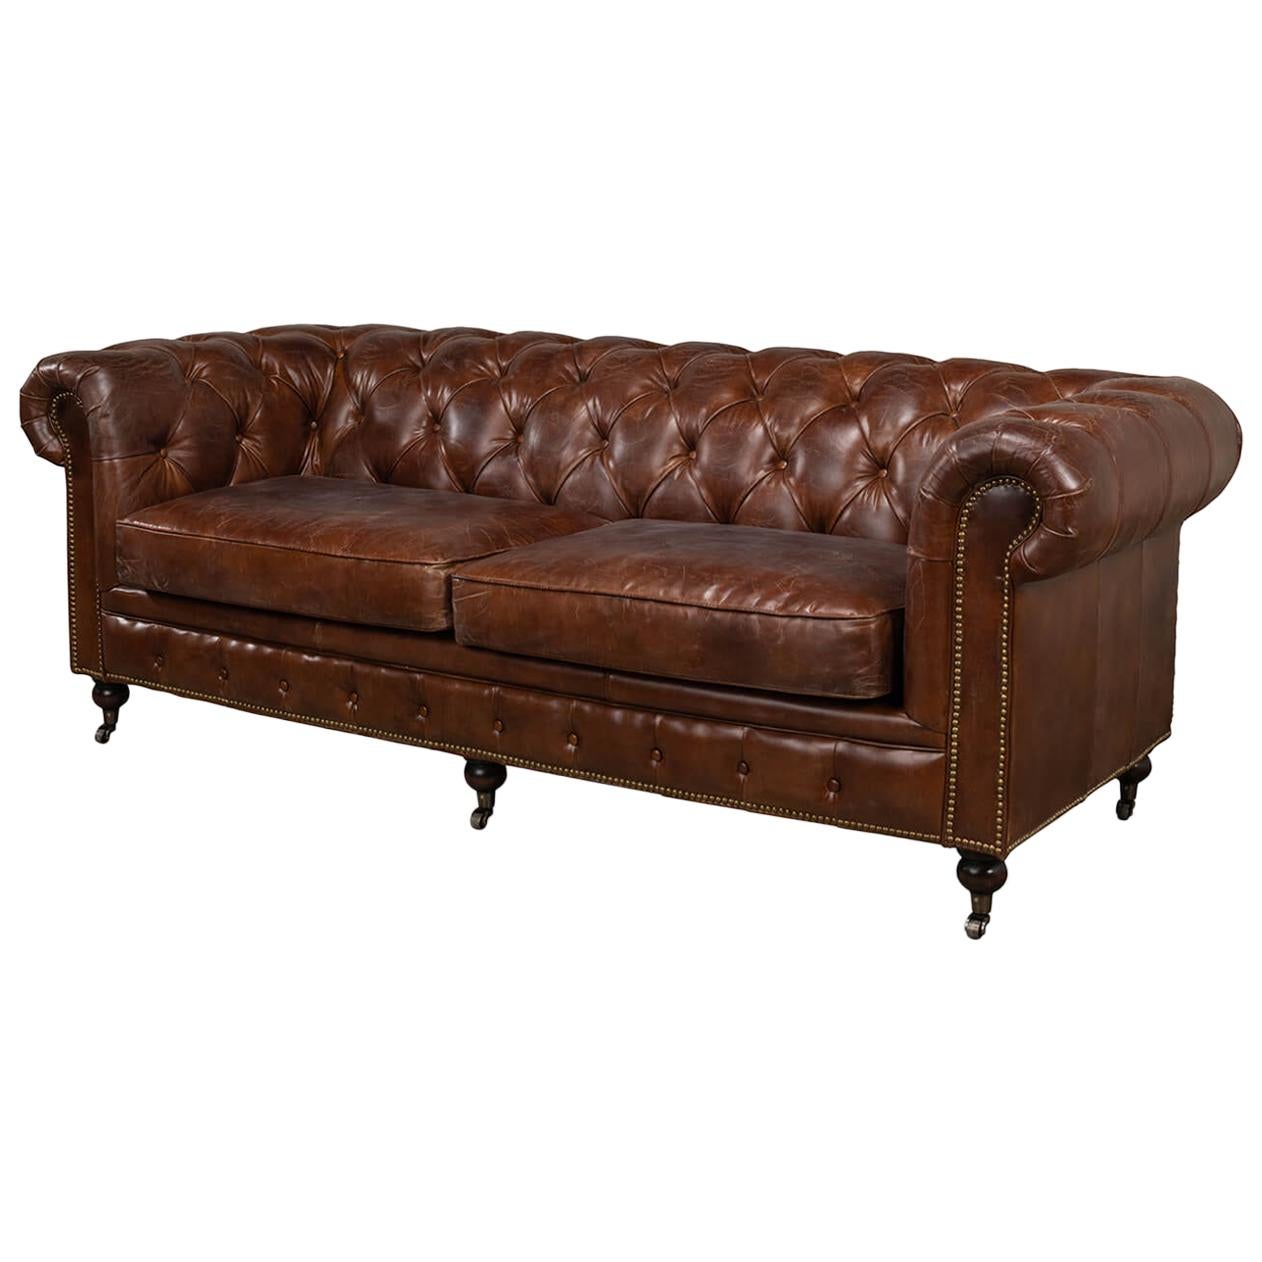 Vintage Style Classic Chesterfield Sofa